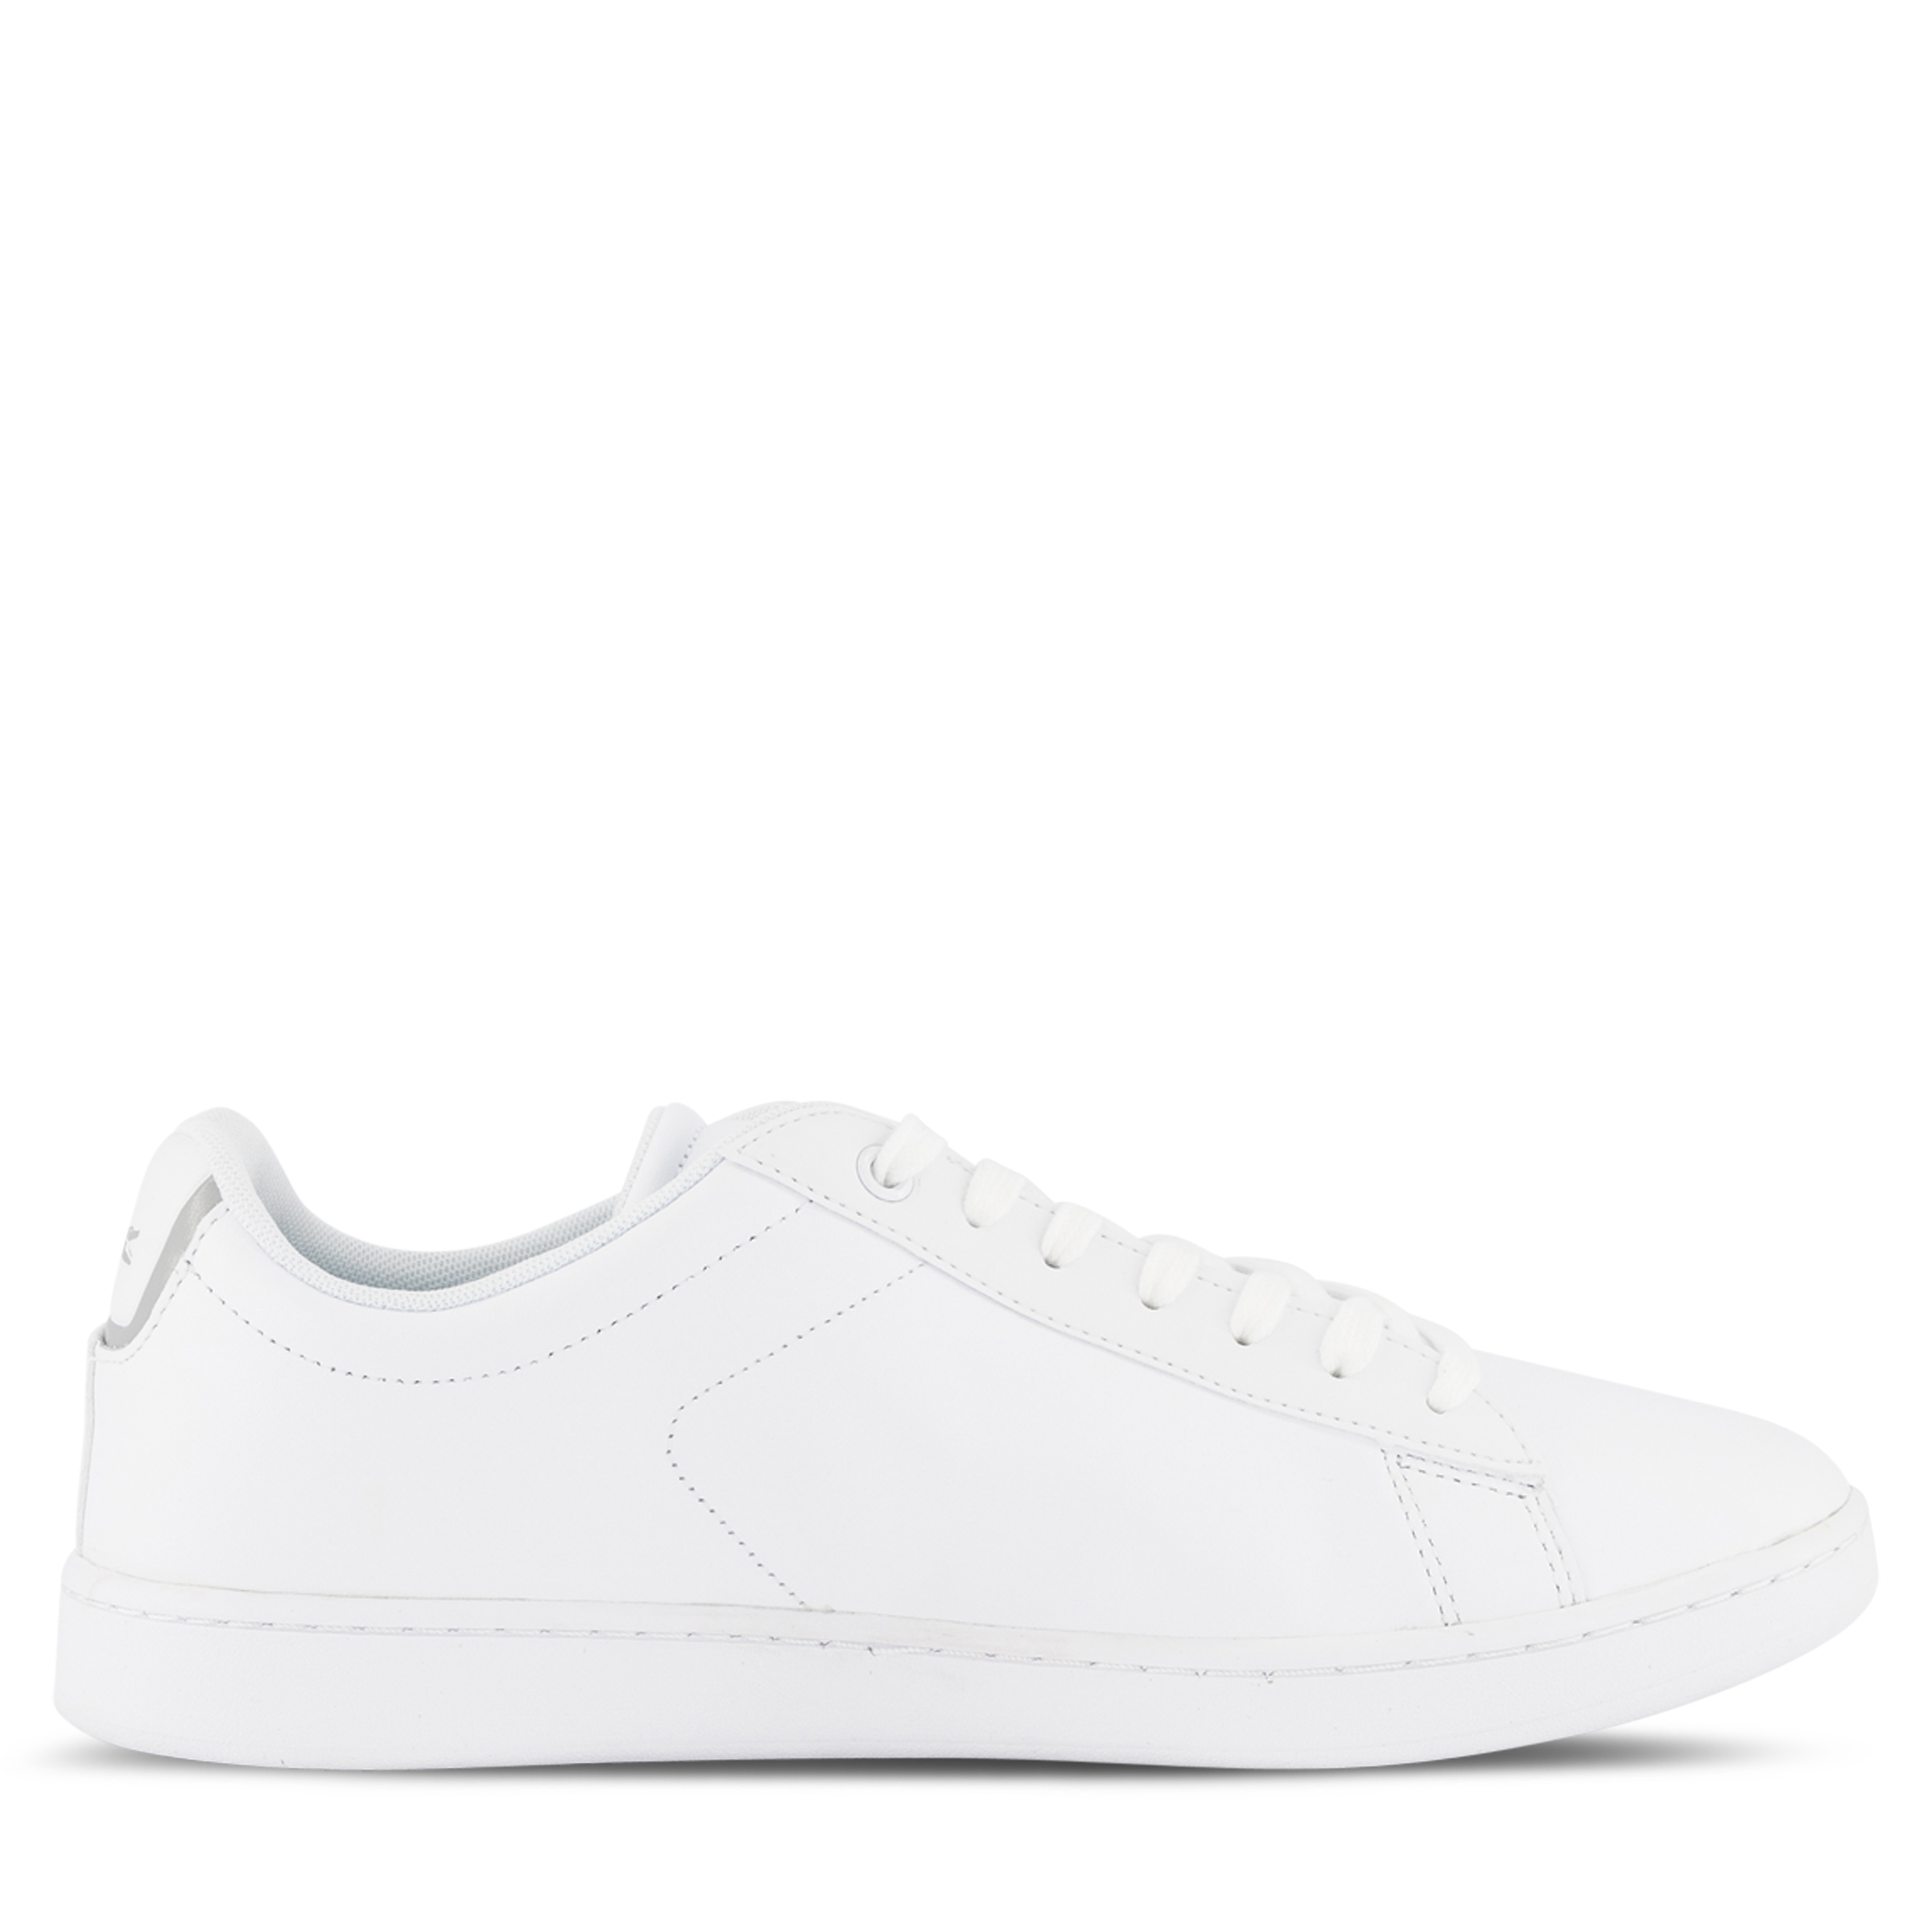 Lacoste CARNABY BL21 White/White | Hype DC